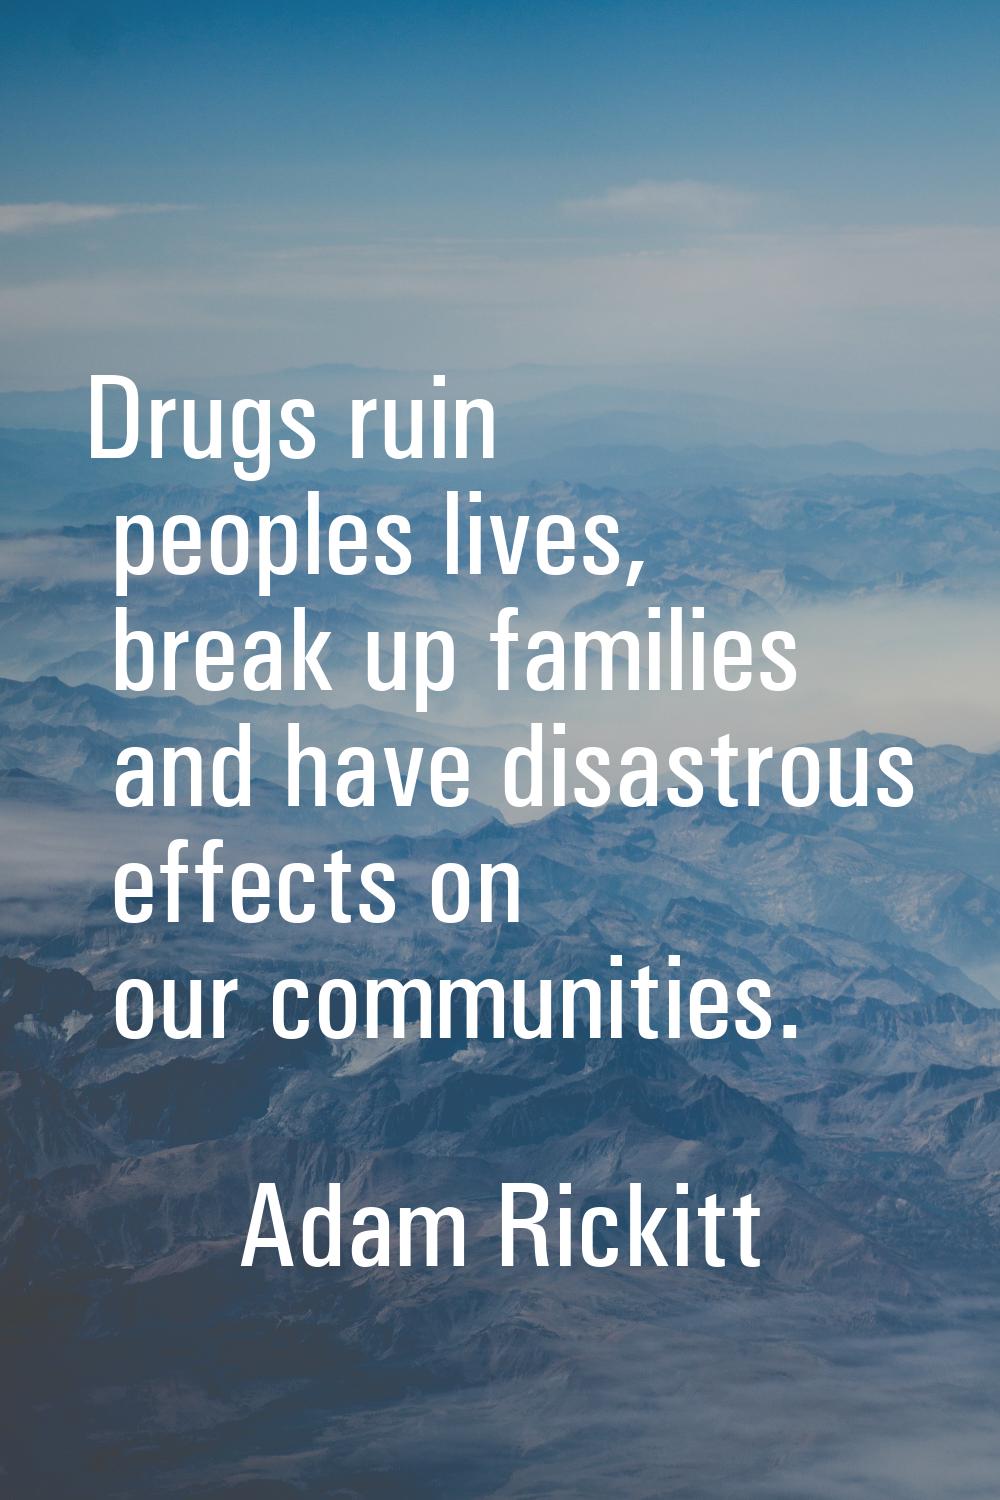 Drugs ruin peoples lives, break up families and have disastrous effects on our communities.